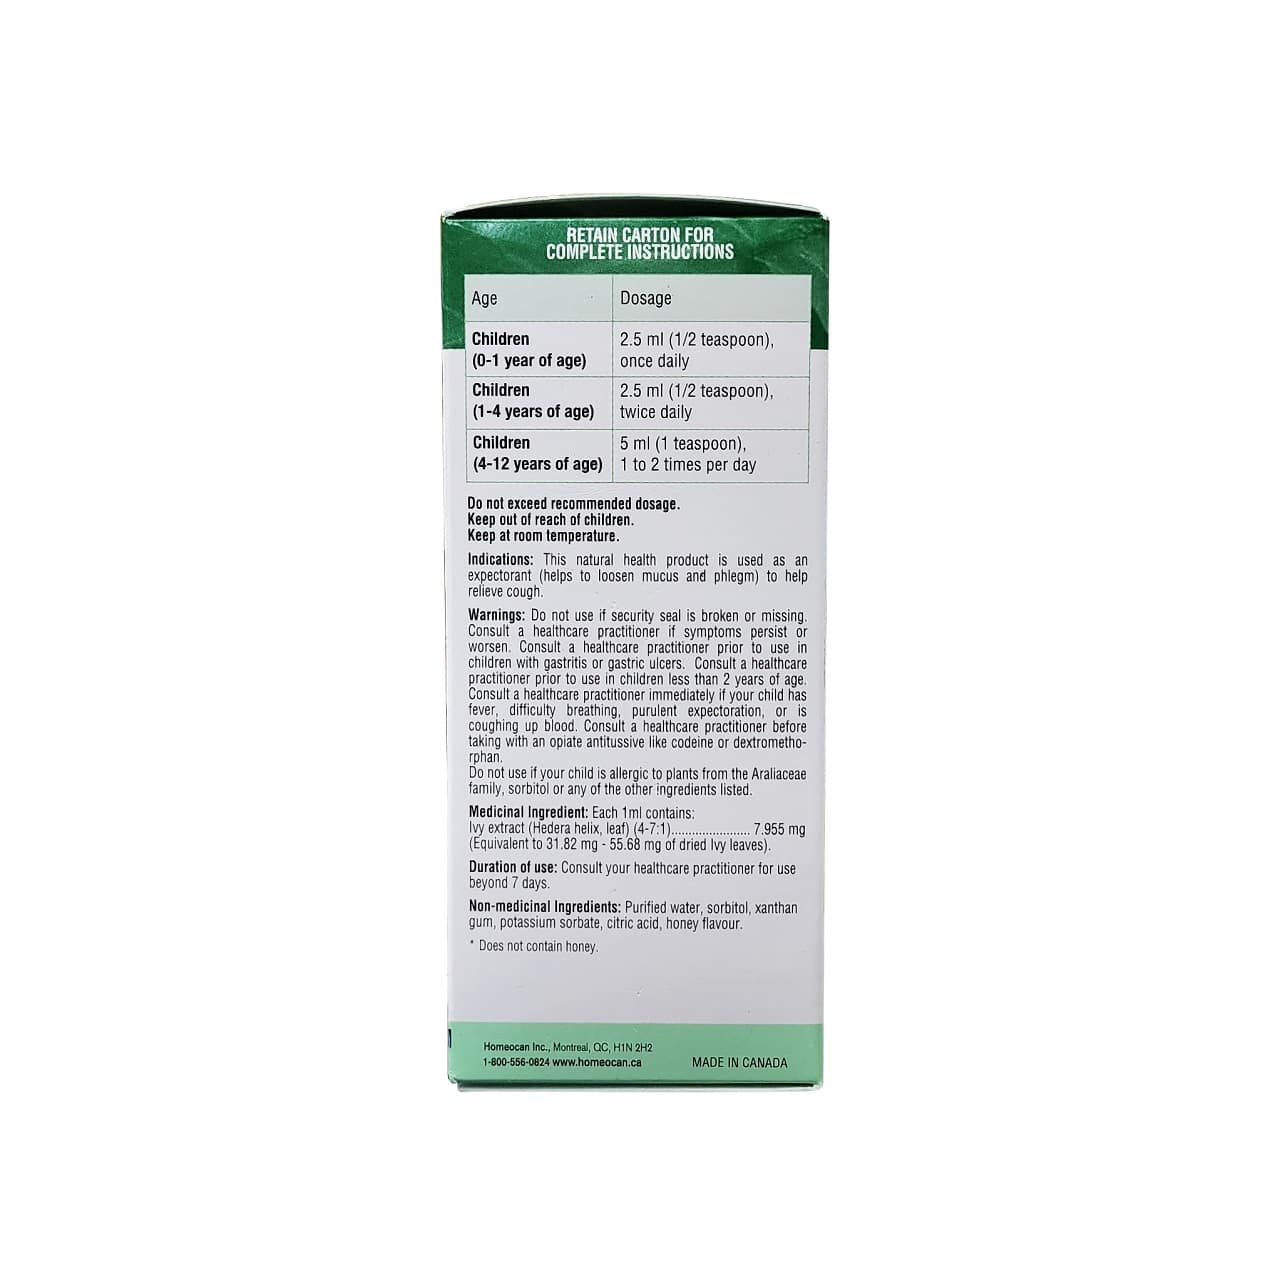 Duraction, indications, warnings, and ingredients for Homeocan Kids 0-9 Cough and Cold Herbal Syrup (100 mL) in English